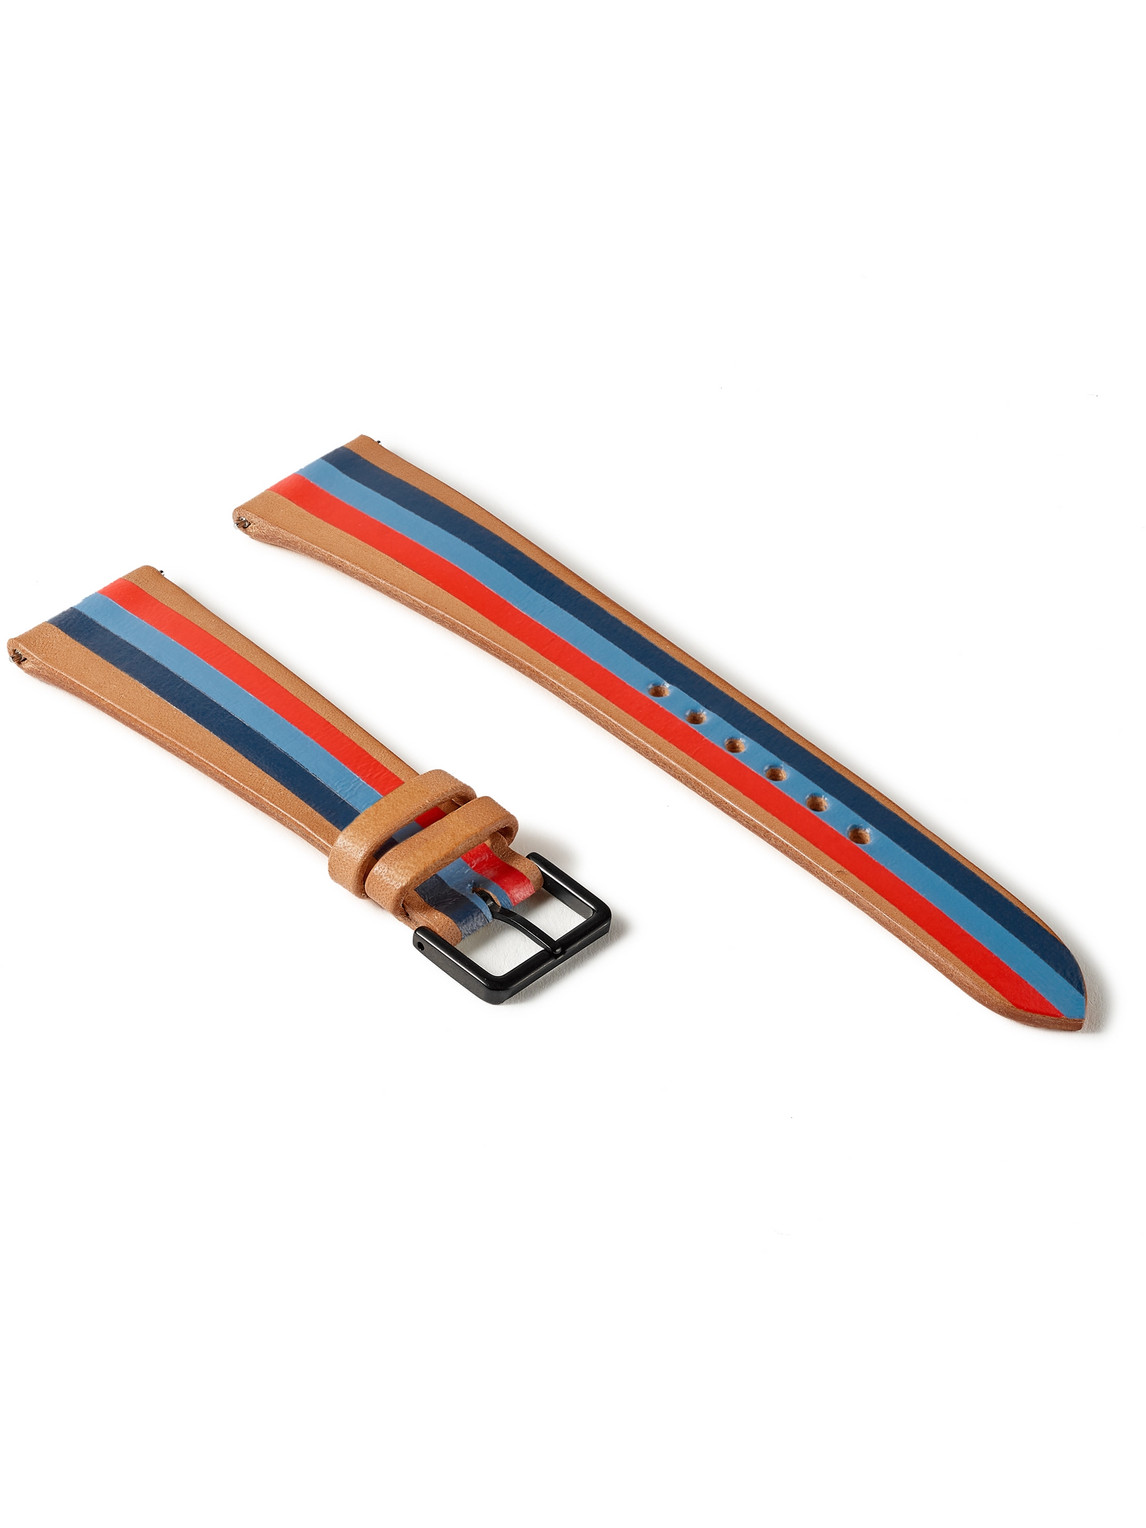 Blue Thunder Striped Leather Watch Strap